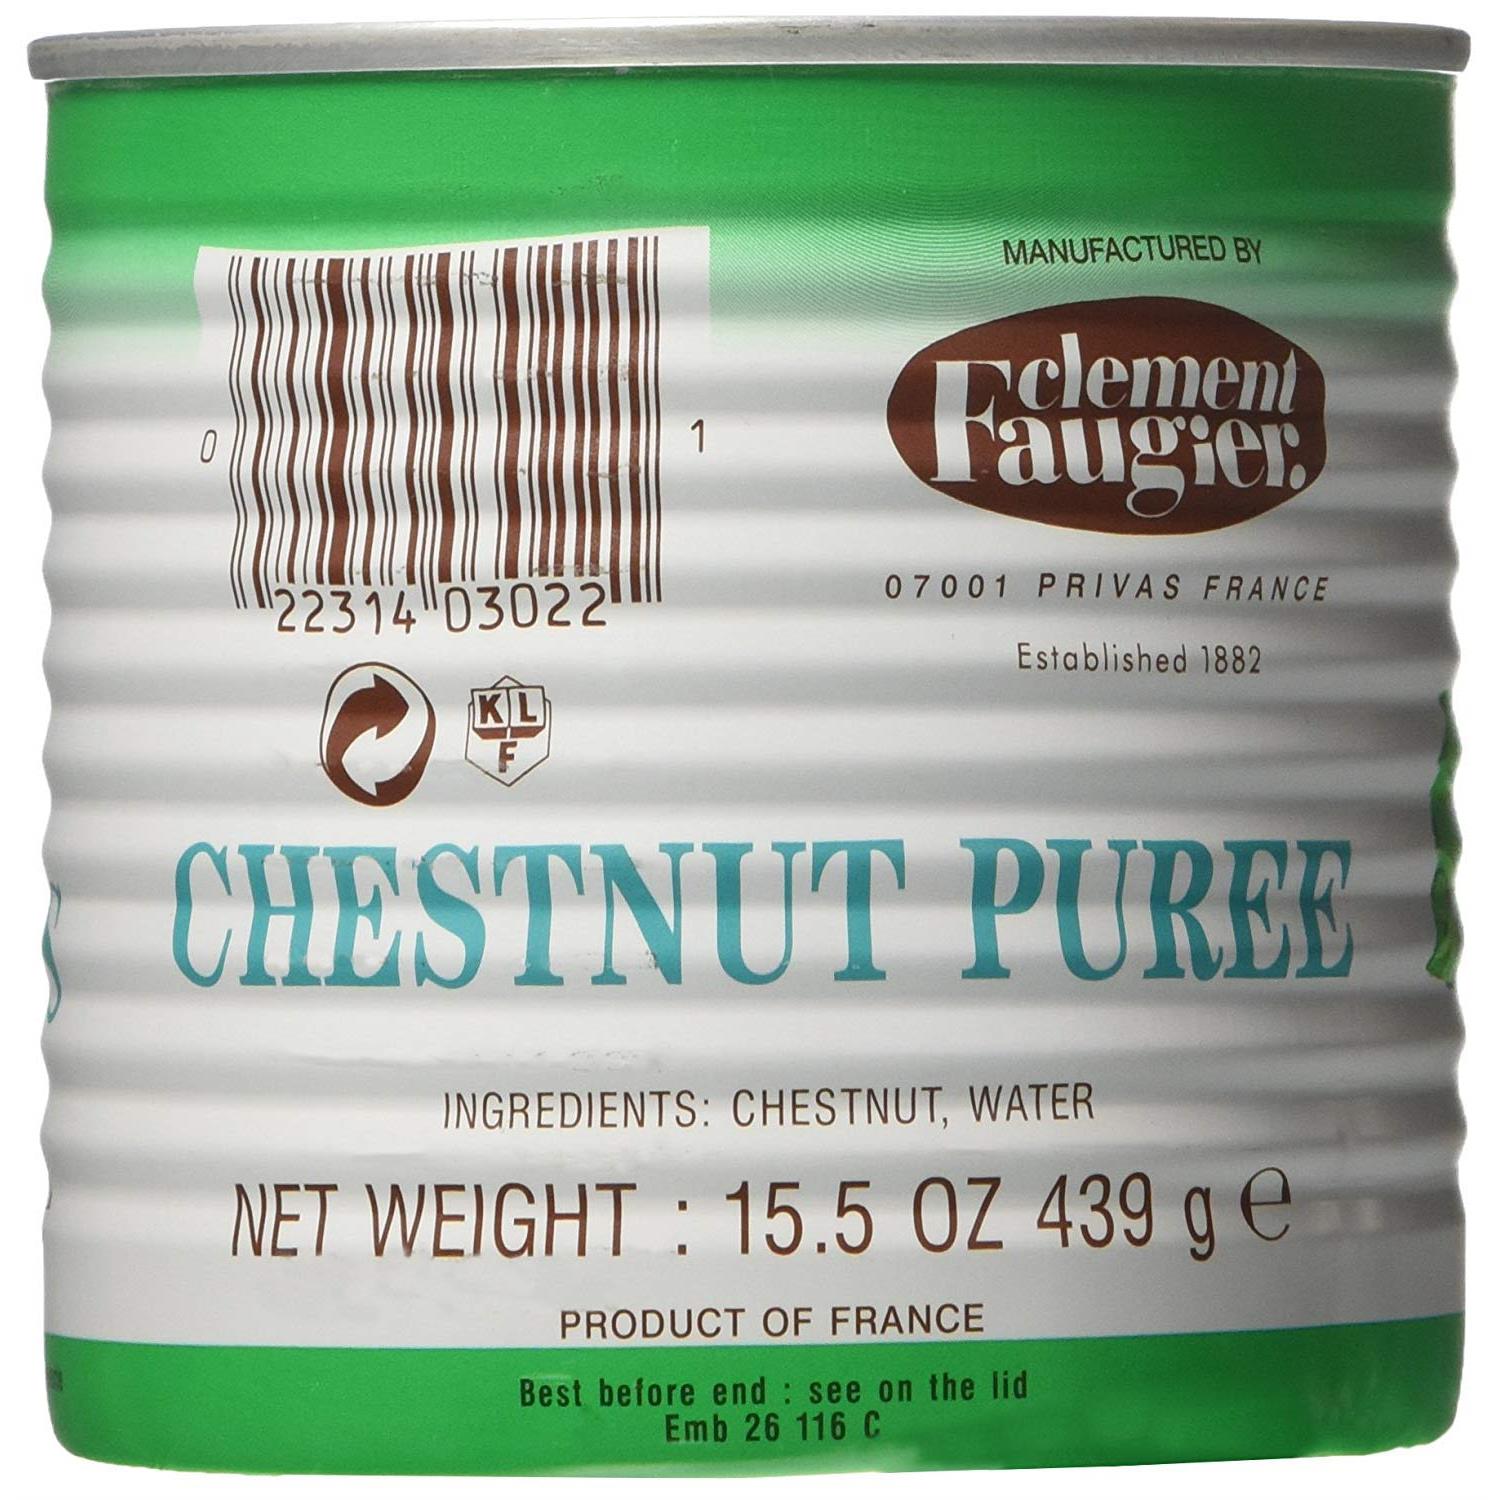 Clement Faugier Chestnut Puree from Ardeche - 15.5 oz. (2 PACK)